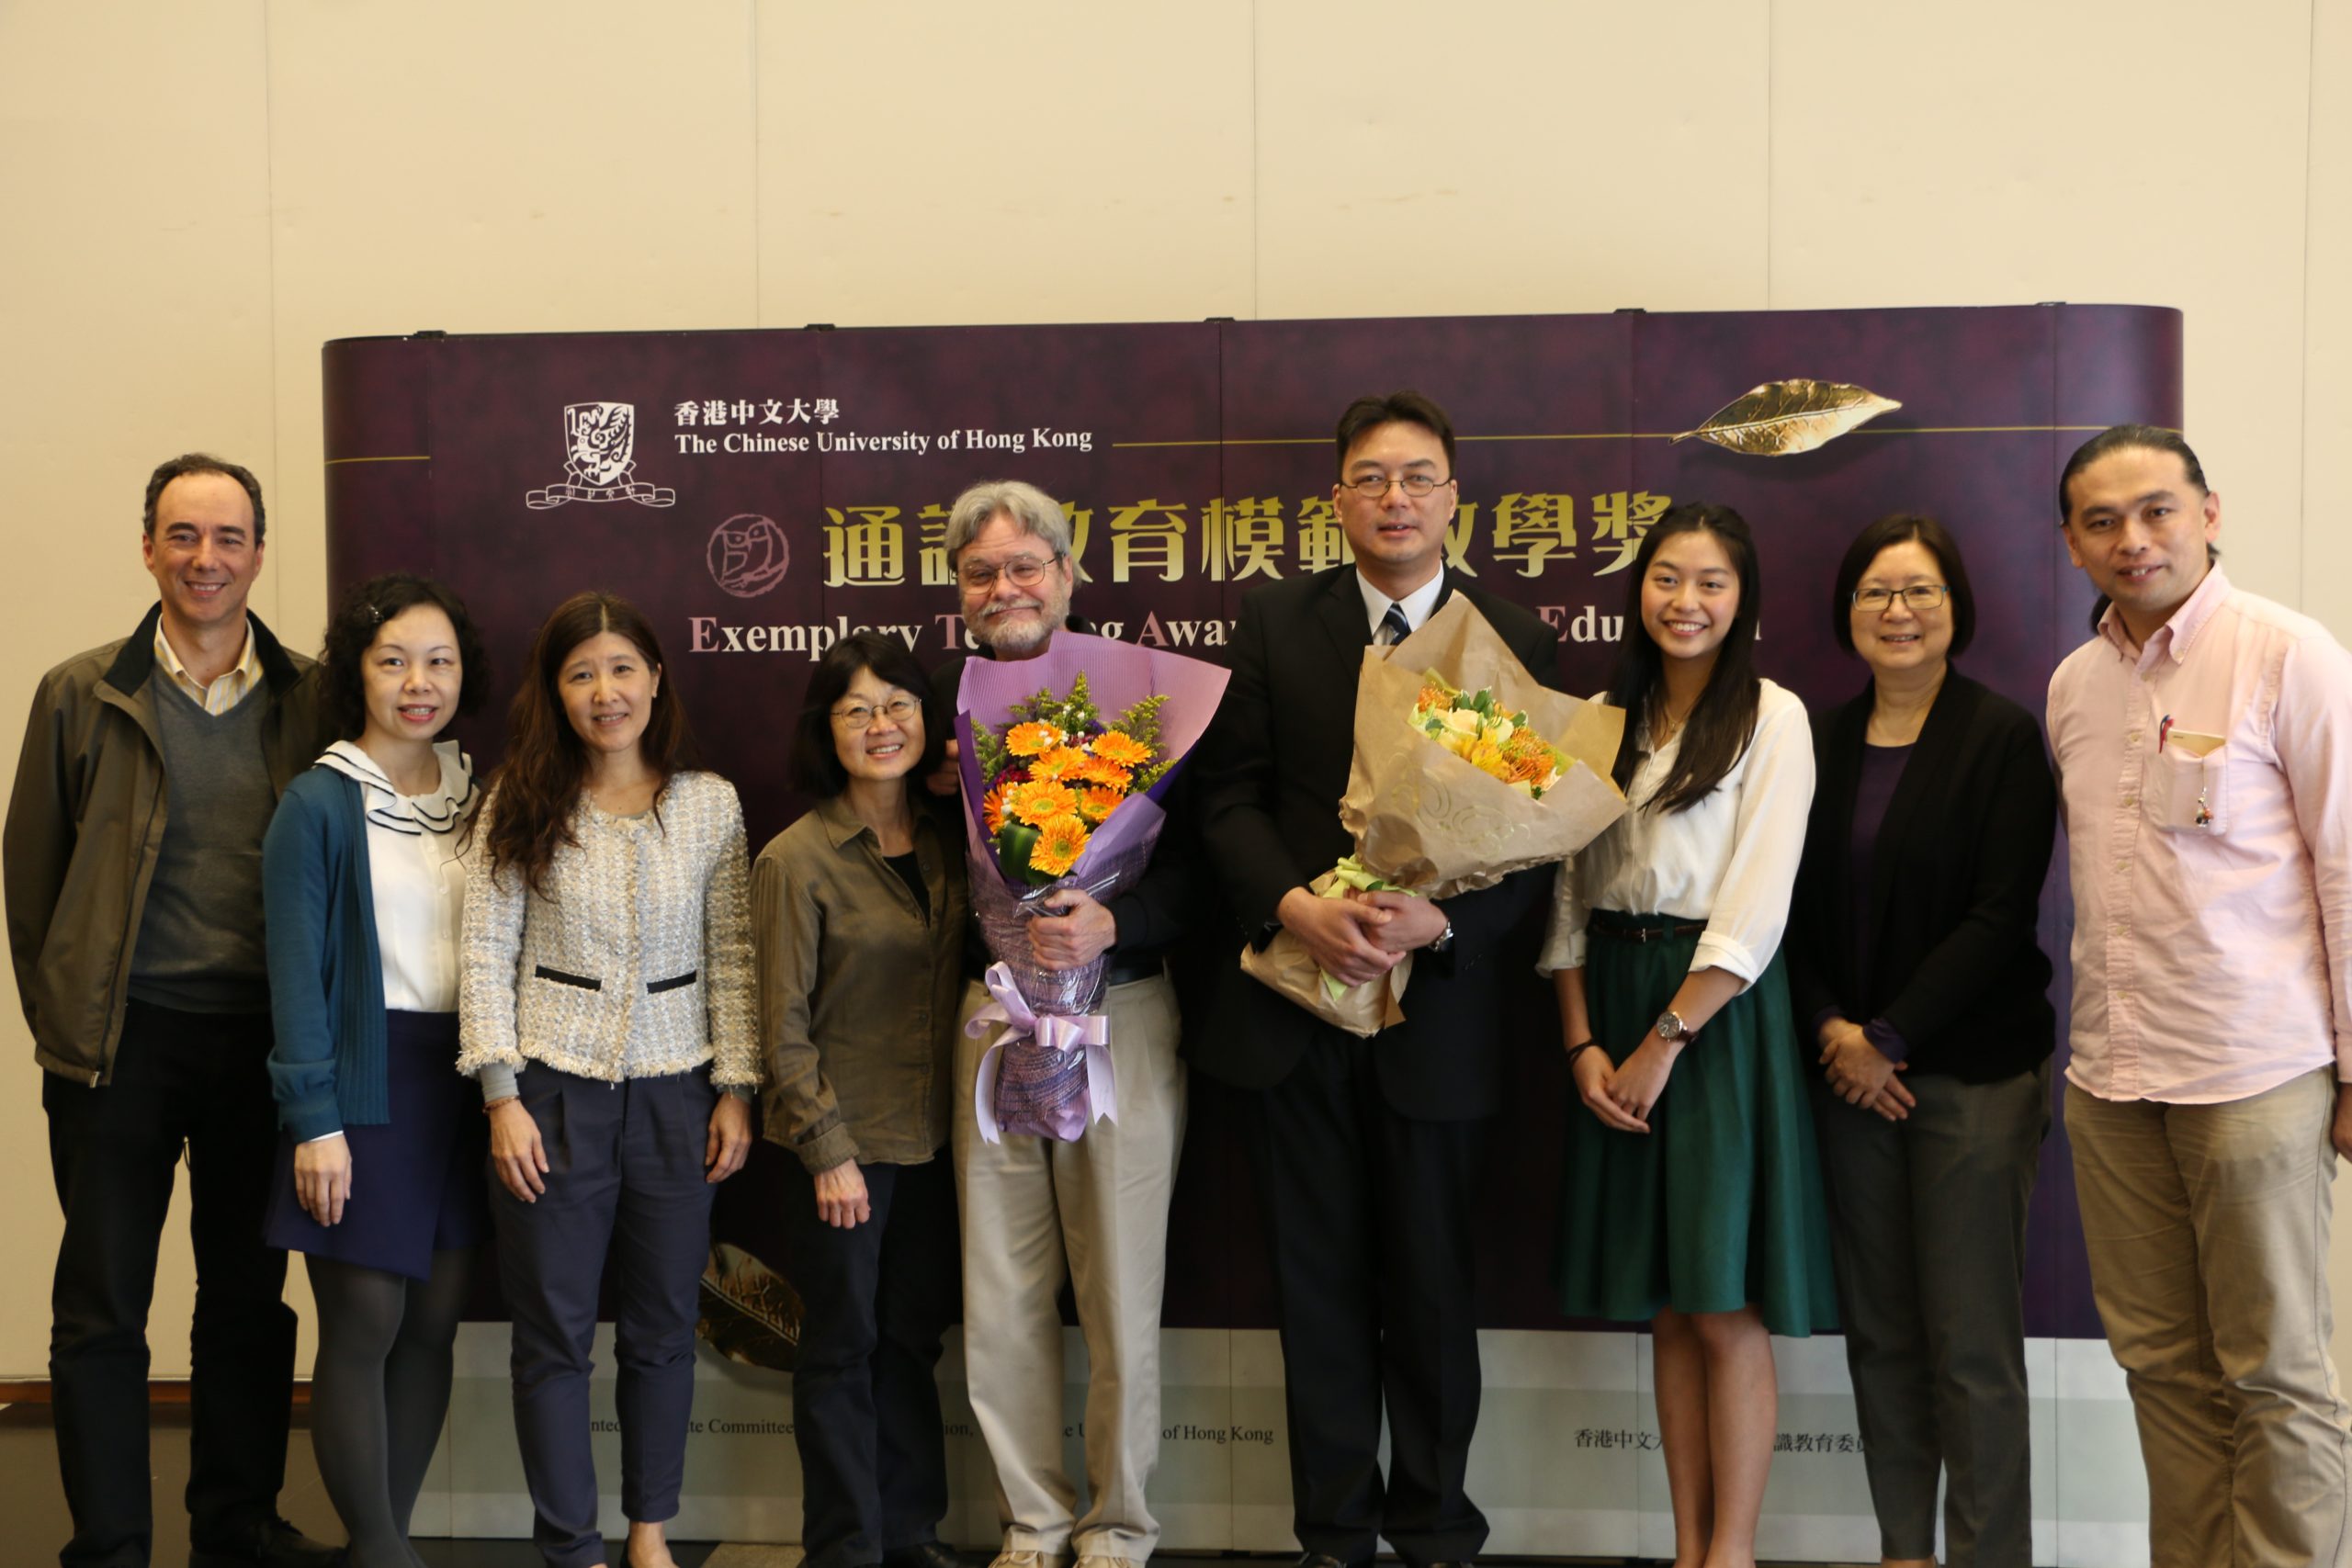 Professor Ho Chi Ming, Professor Gordon Mathews, their wives, their colleagues and students